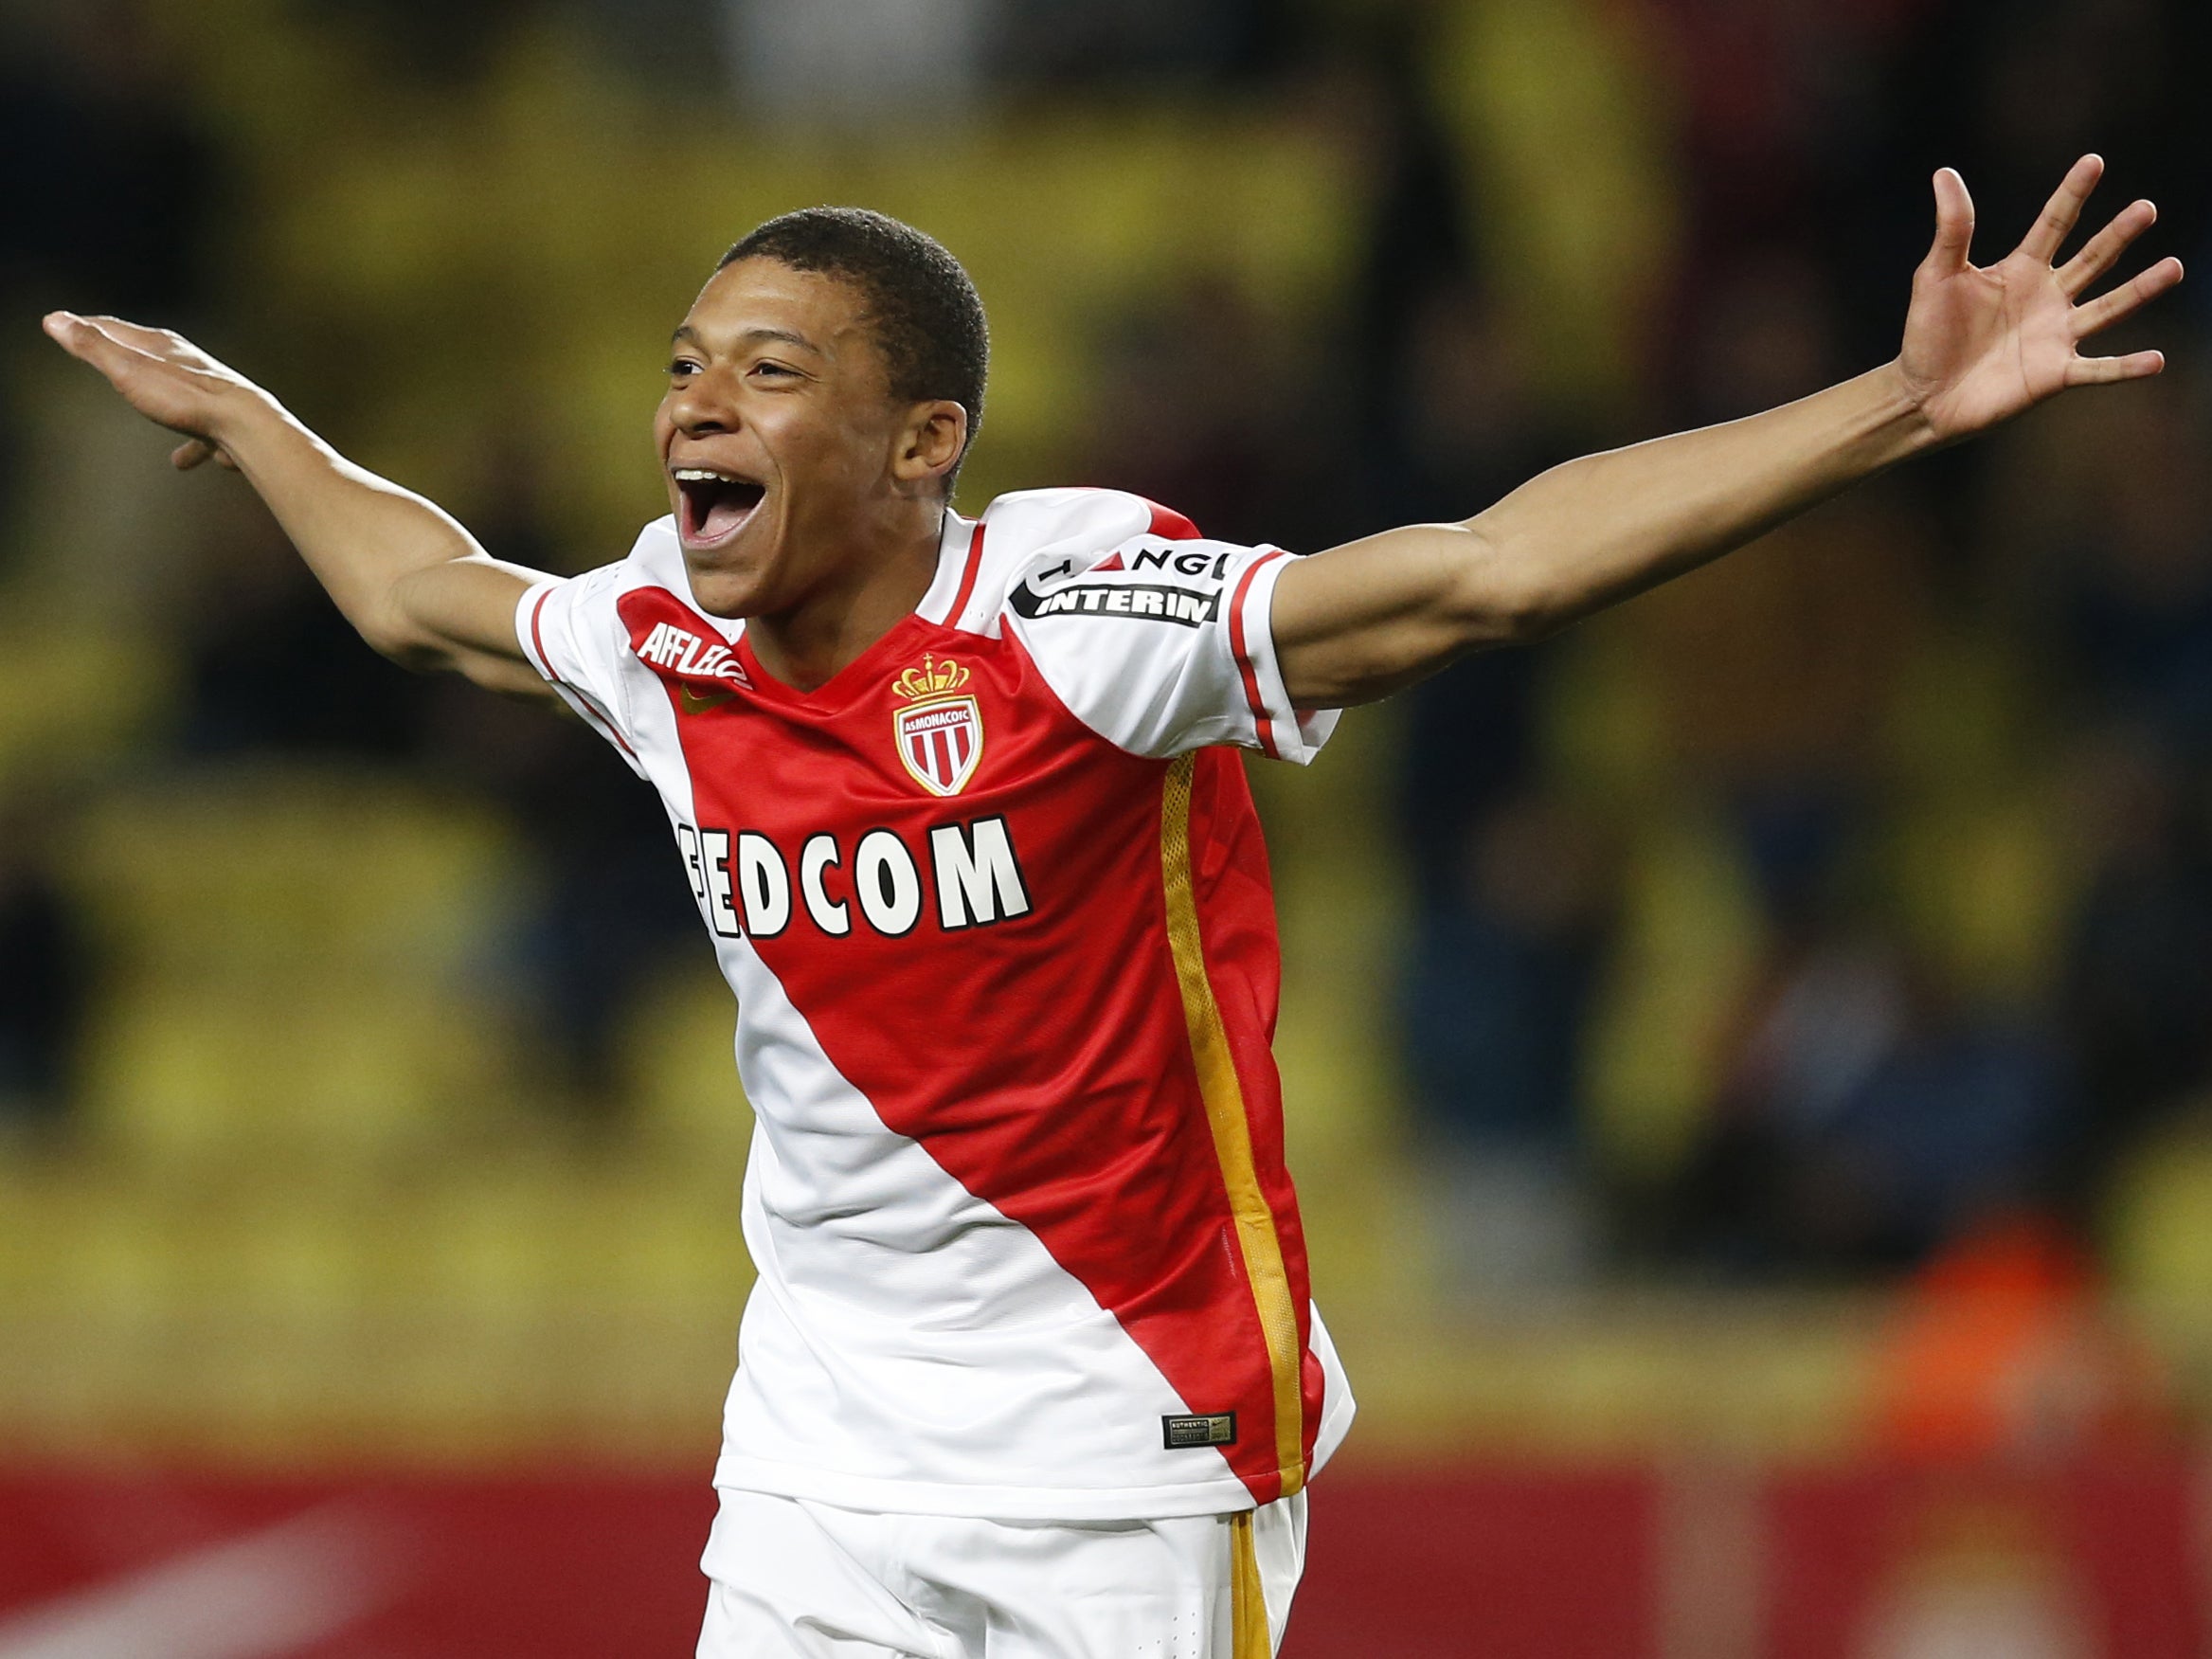 Kylian Mbappé will likely be sold for an even higher fee than Anthony Martial